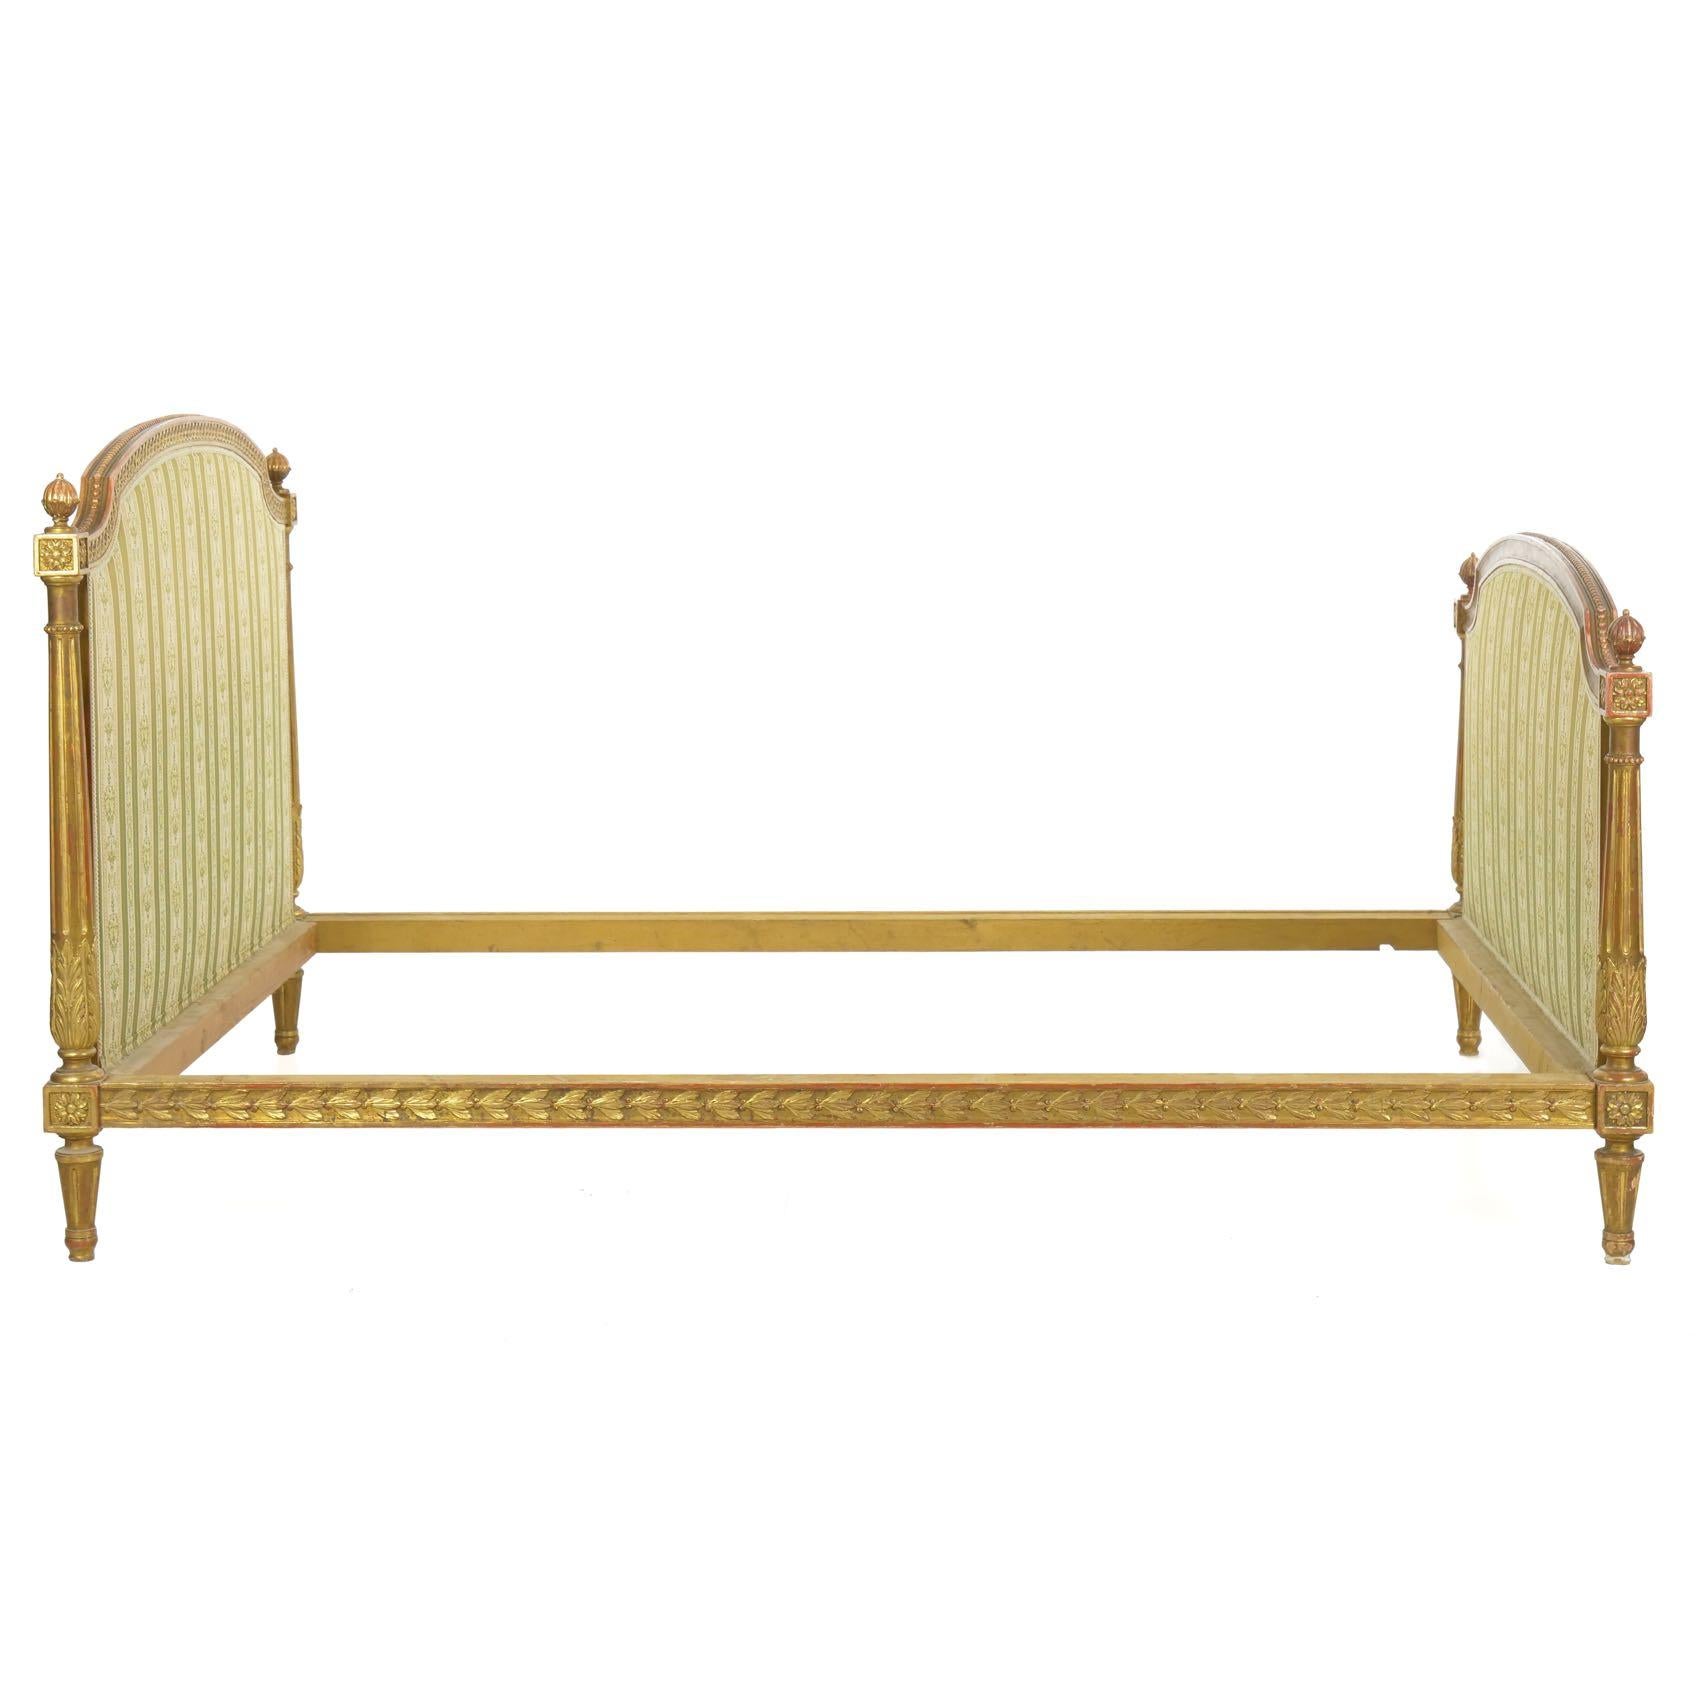 A product of the late 19th-early 20th century, every aspect of this exquisitely carved and gilded bed frame has been carefully designed and executed. It is covered in a relatively recent striped linen and comes with a matching spread (not pictured).